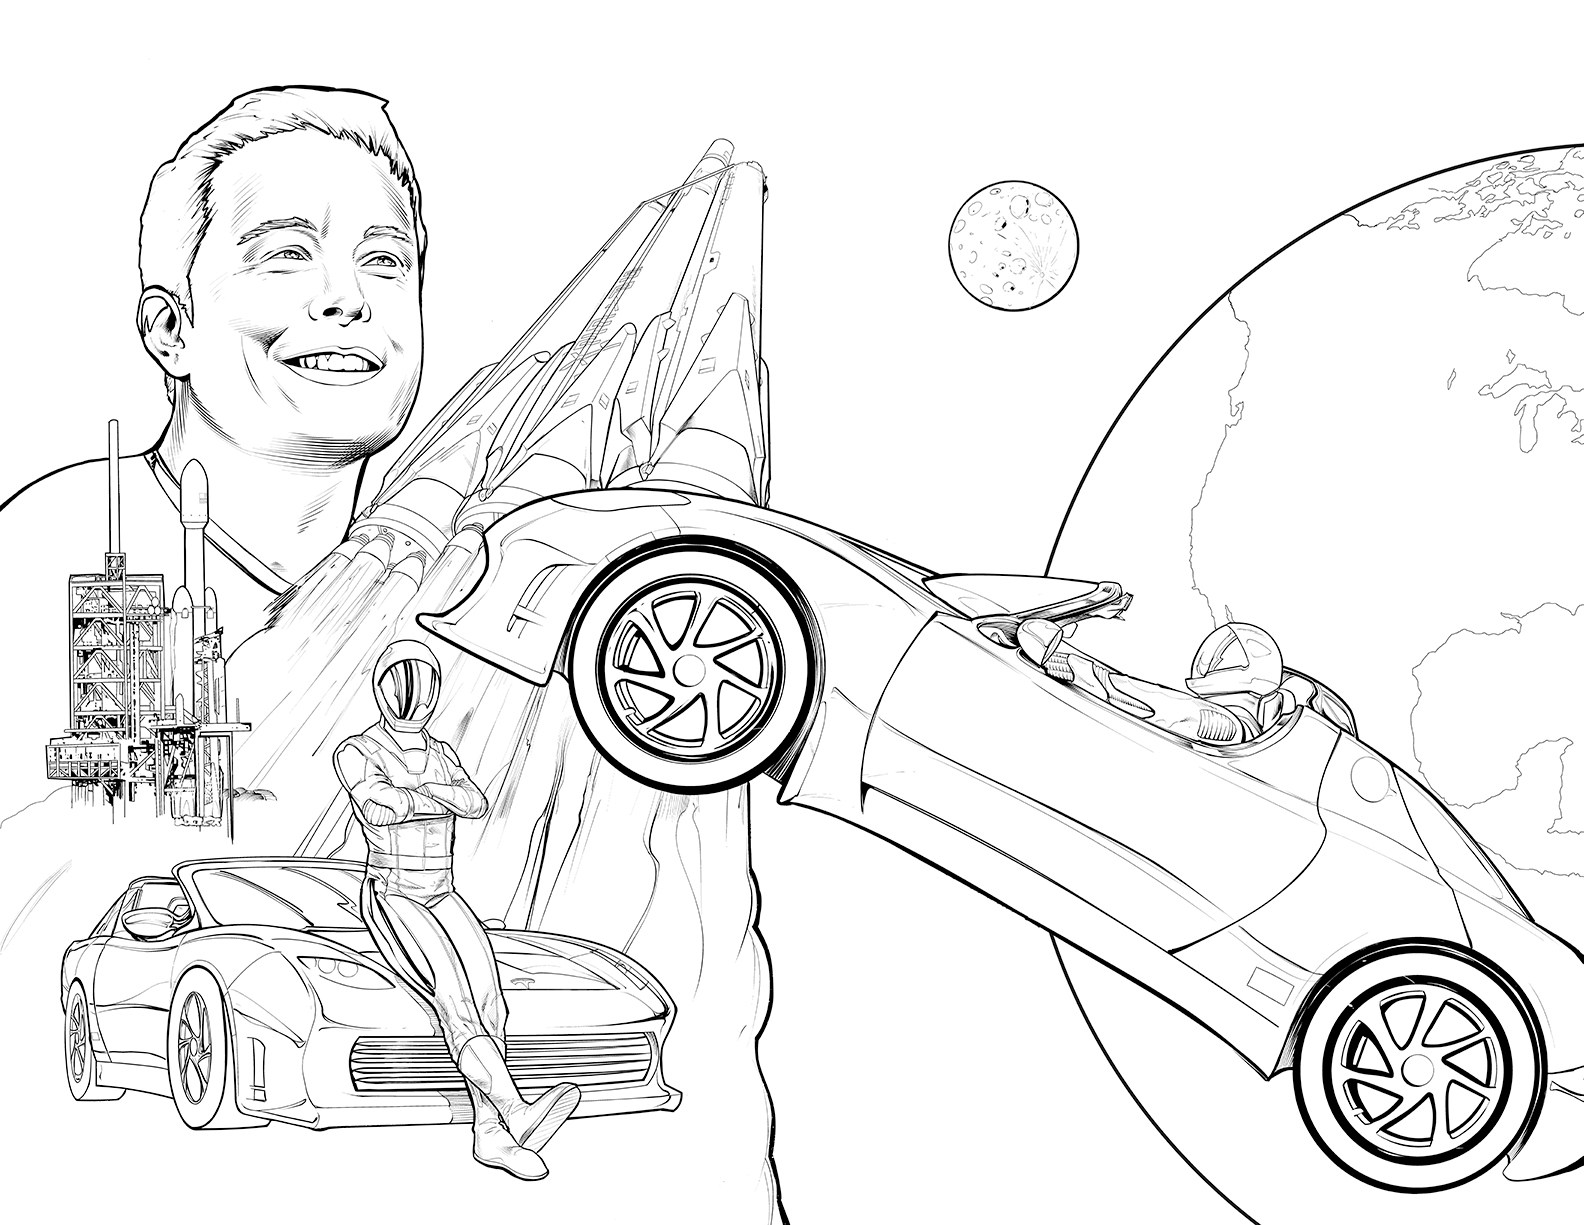 Free Starman Coloring Book ⋆ The Adventures of Starman